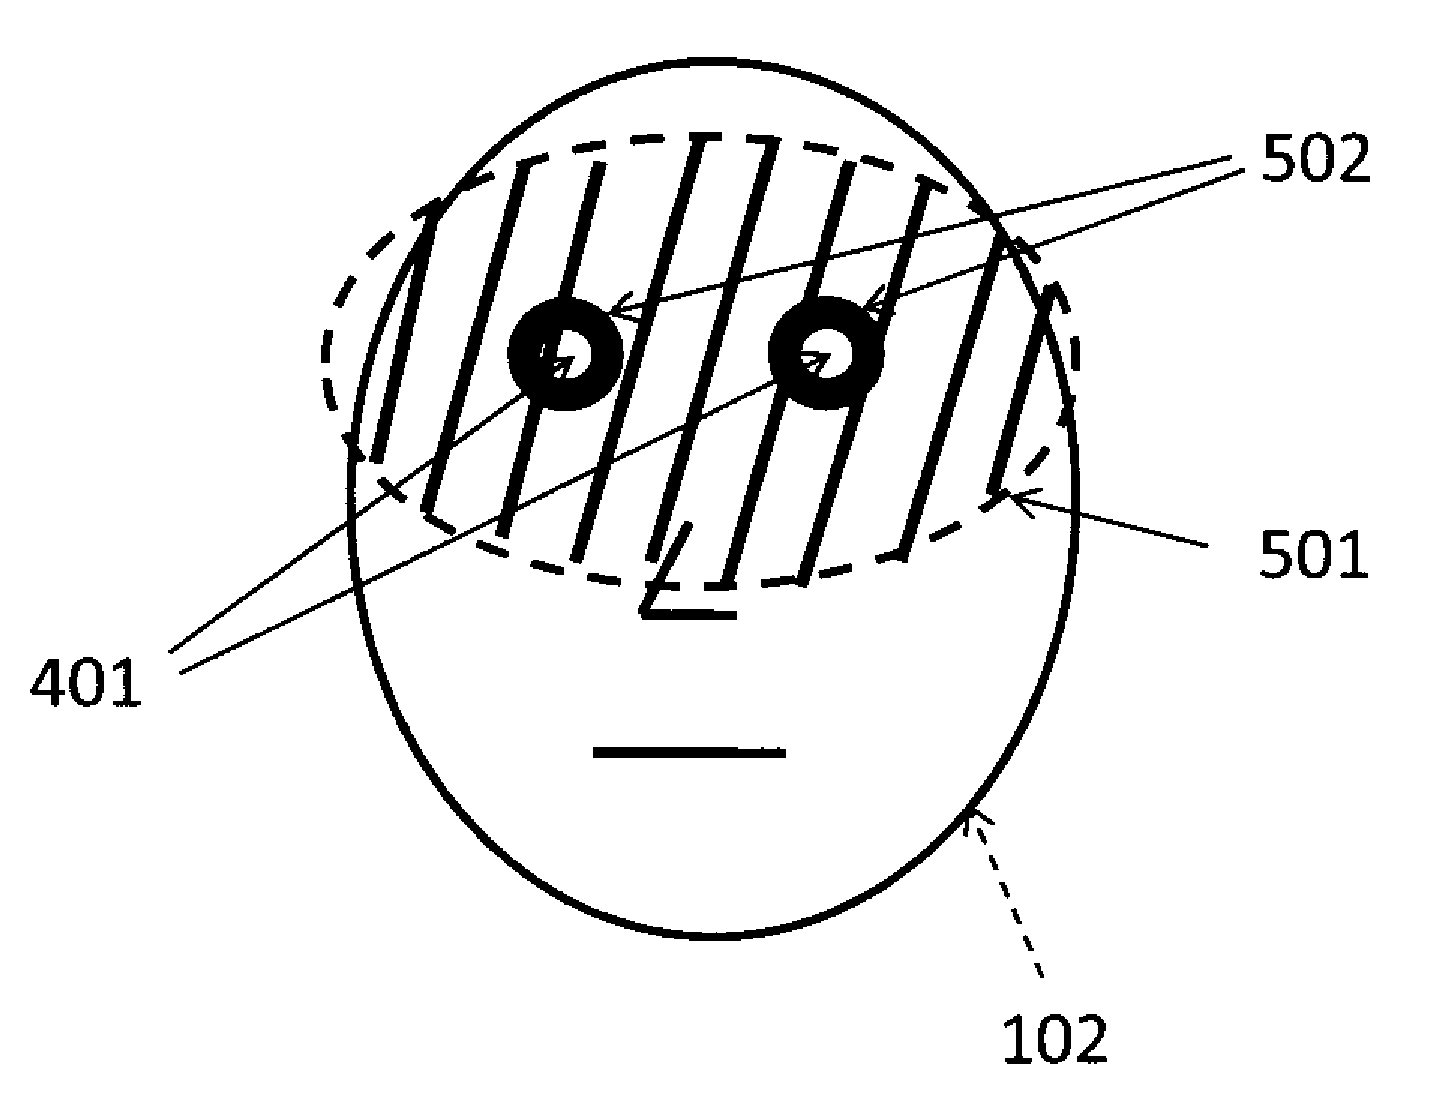 Operator interface for face and iris recognition devices